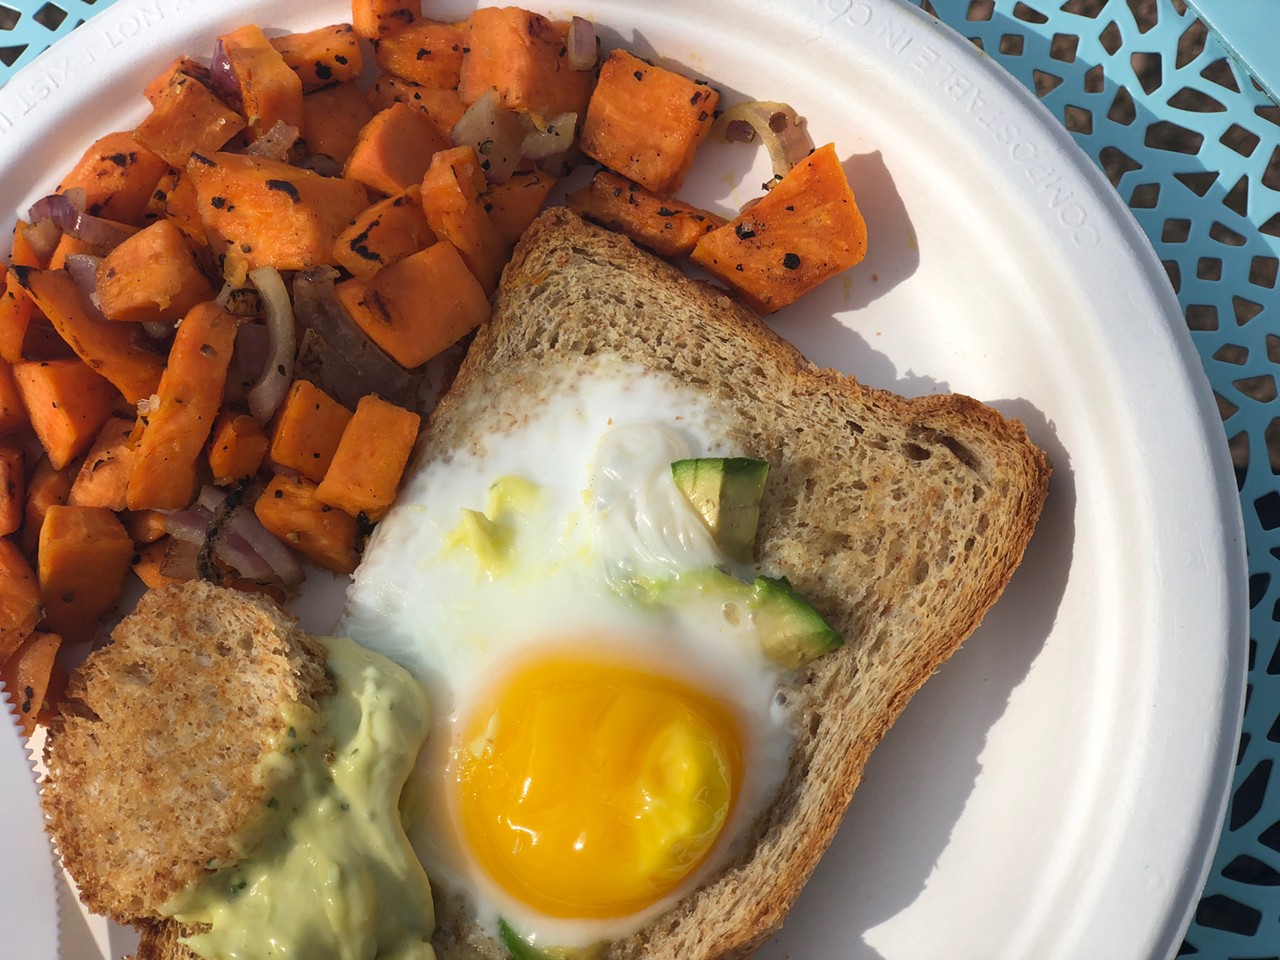 The Good Kind brunch menu features savory items like the Toad and Frog Together— a free range egg, avocado, sweet potatoes and green aioli.